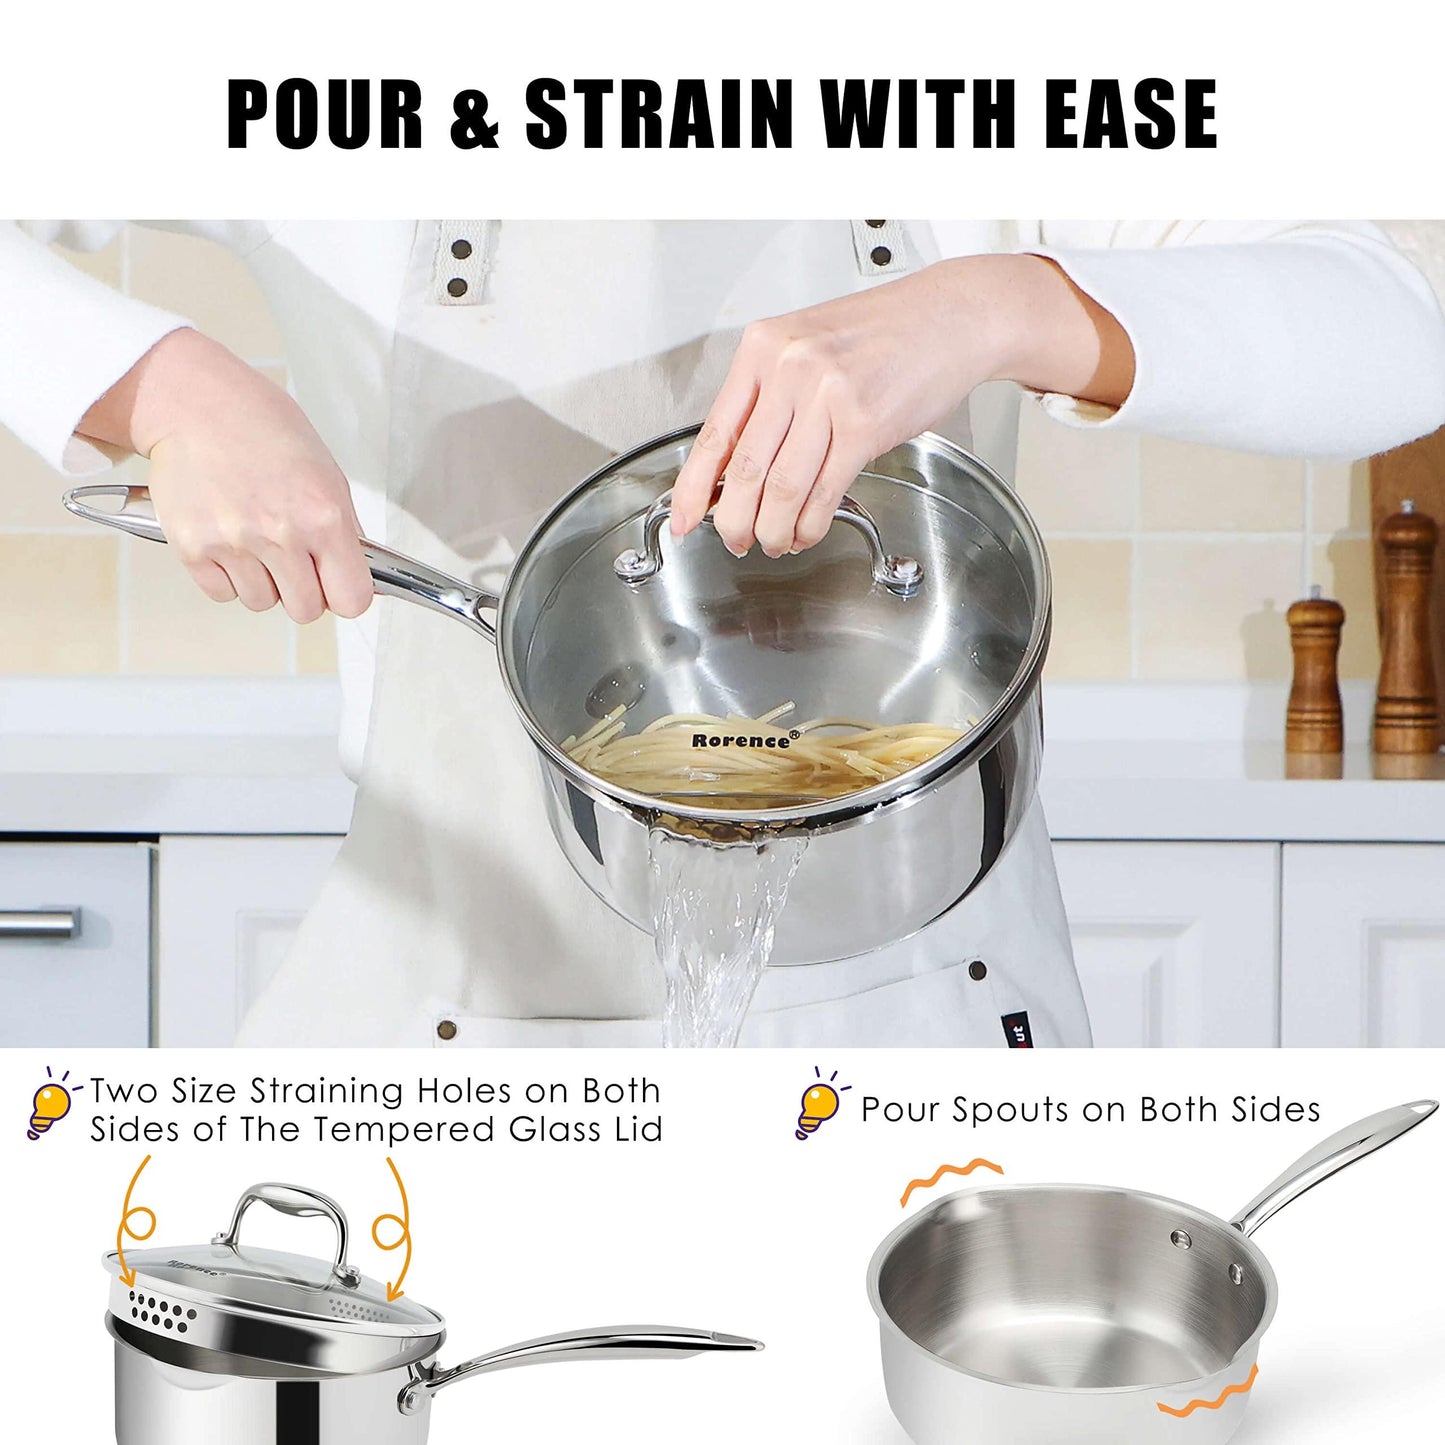 Rorence 3-Quart Saucepan with Lid: Pour and Strain Stainless Steel Sauce Pan with Pour Spouts, Capsule Bottom & Tempered Glass Lid - CookCave